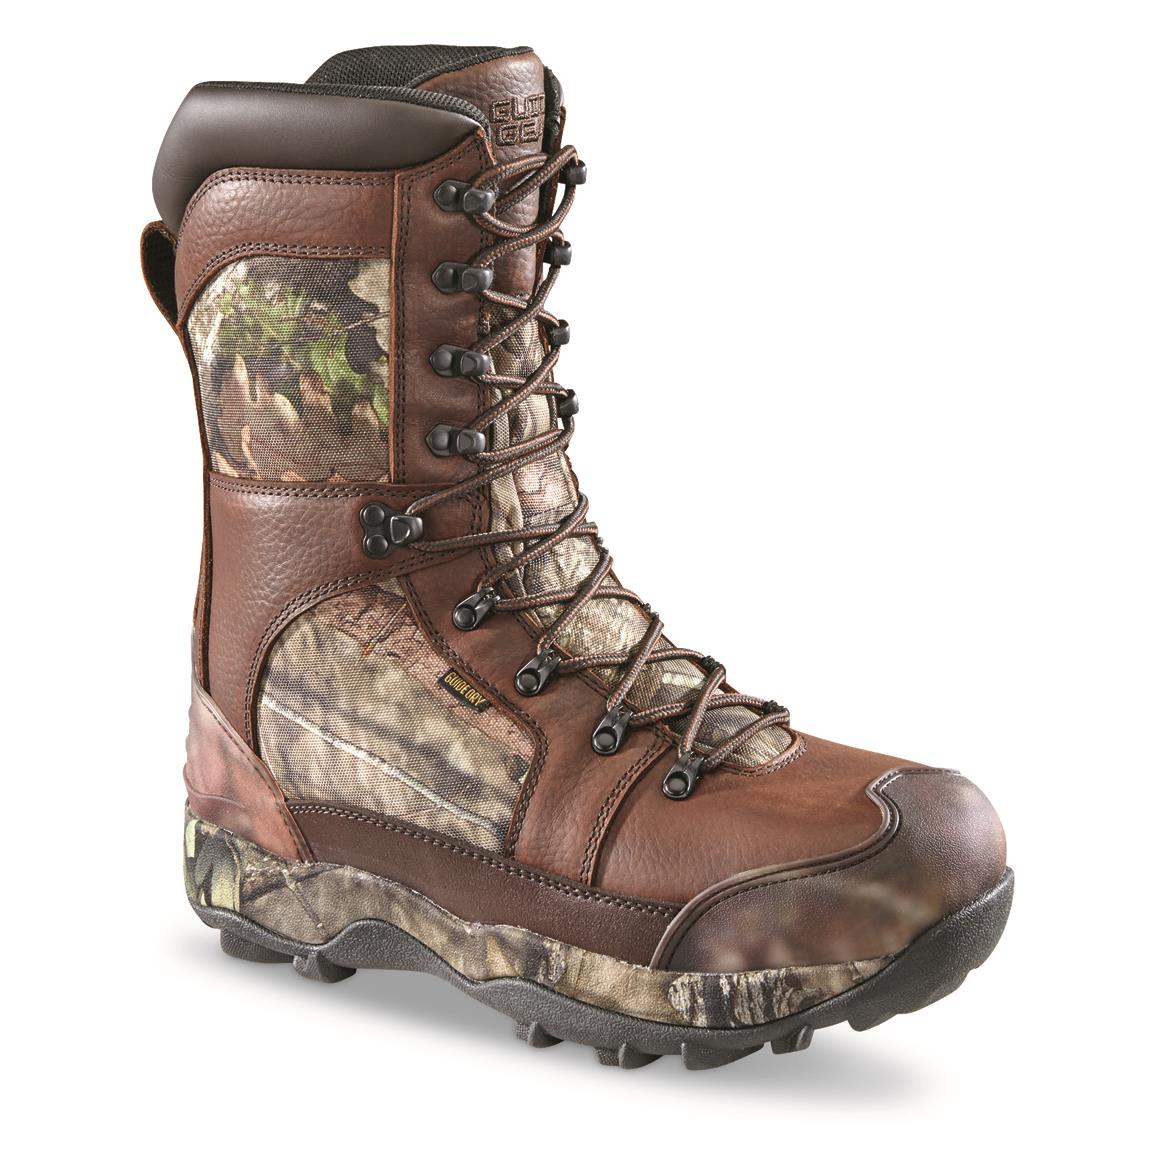 Guide Gear Monolithic Extreme Waterproof Insulated Hunting Boots, 2,400-gram Thinsulate Ultra, Mossy Oak Break-Up® COUNTRY™